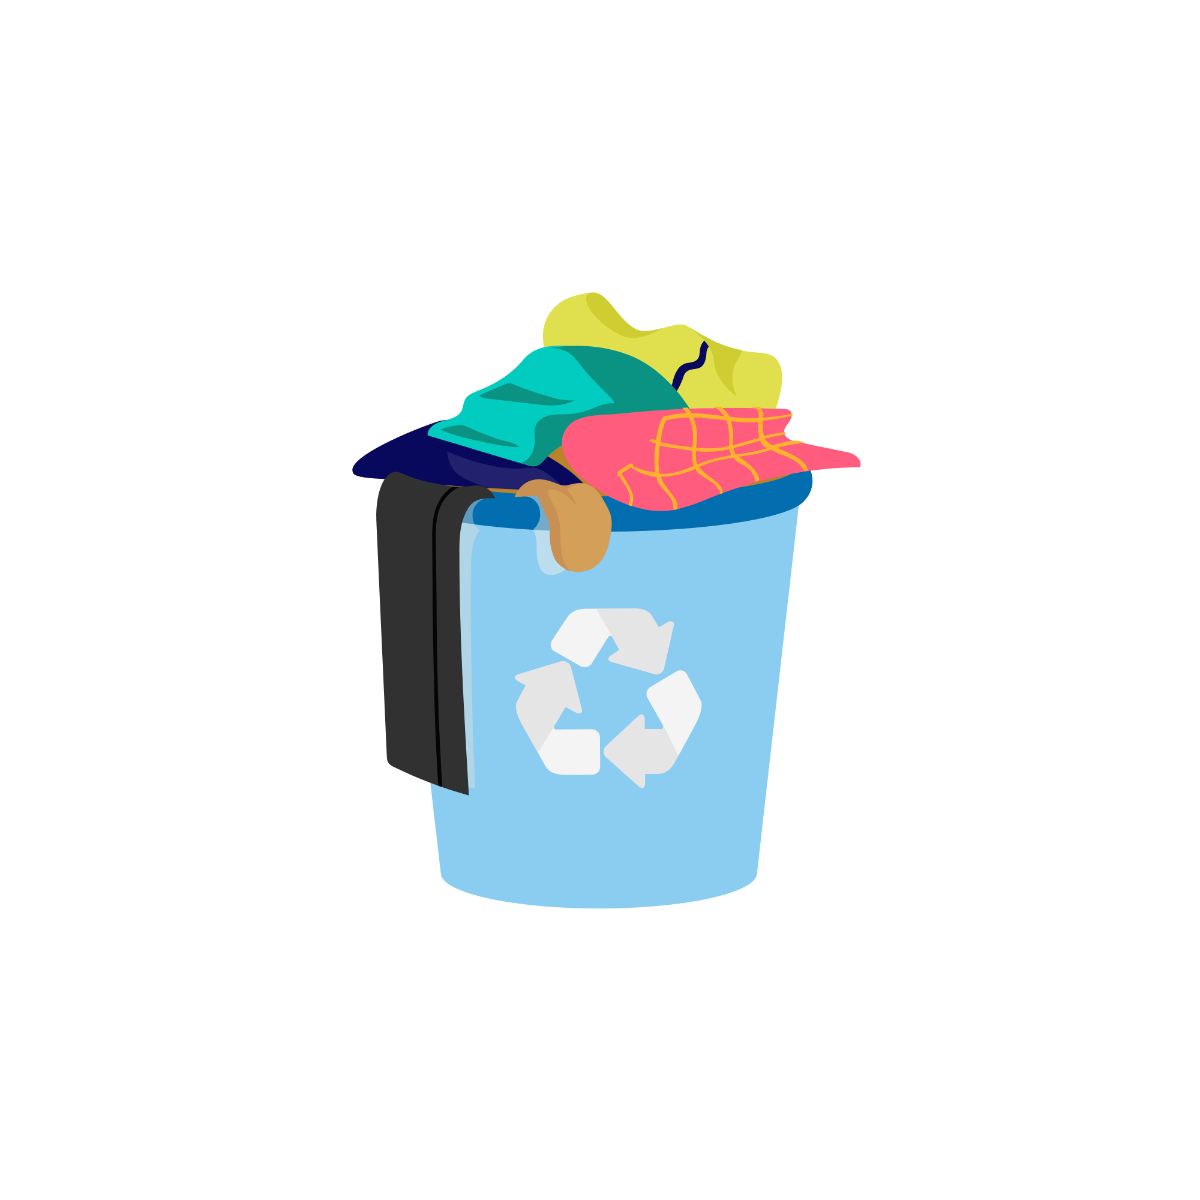 Recycle Clothes Vector